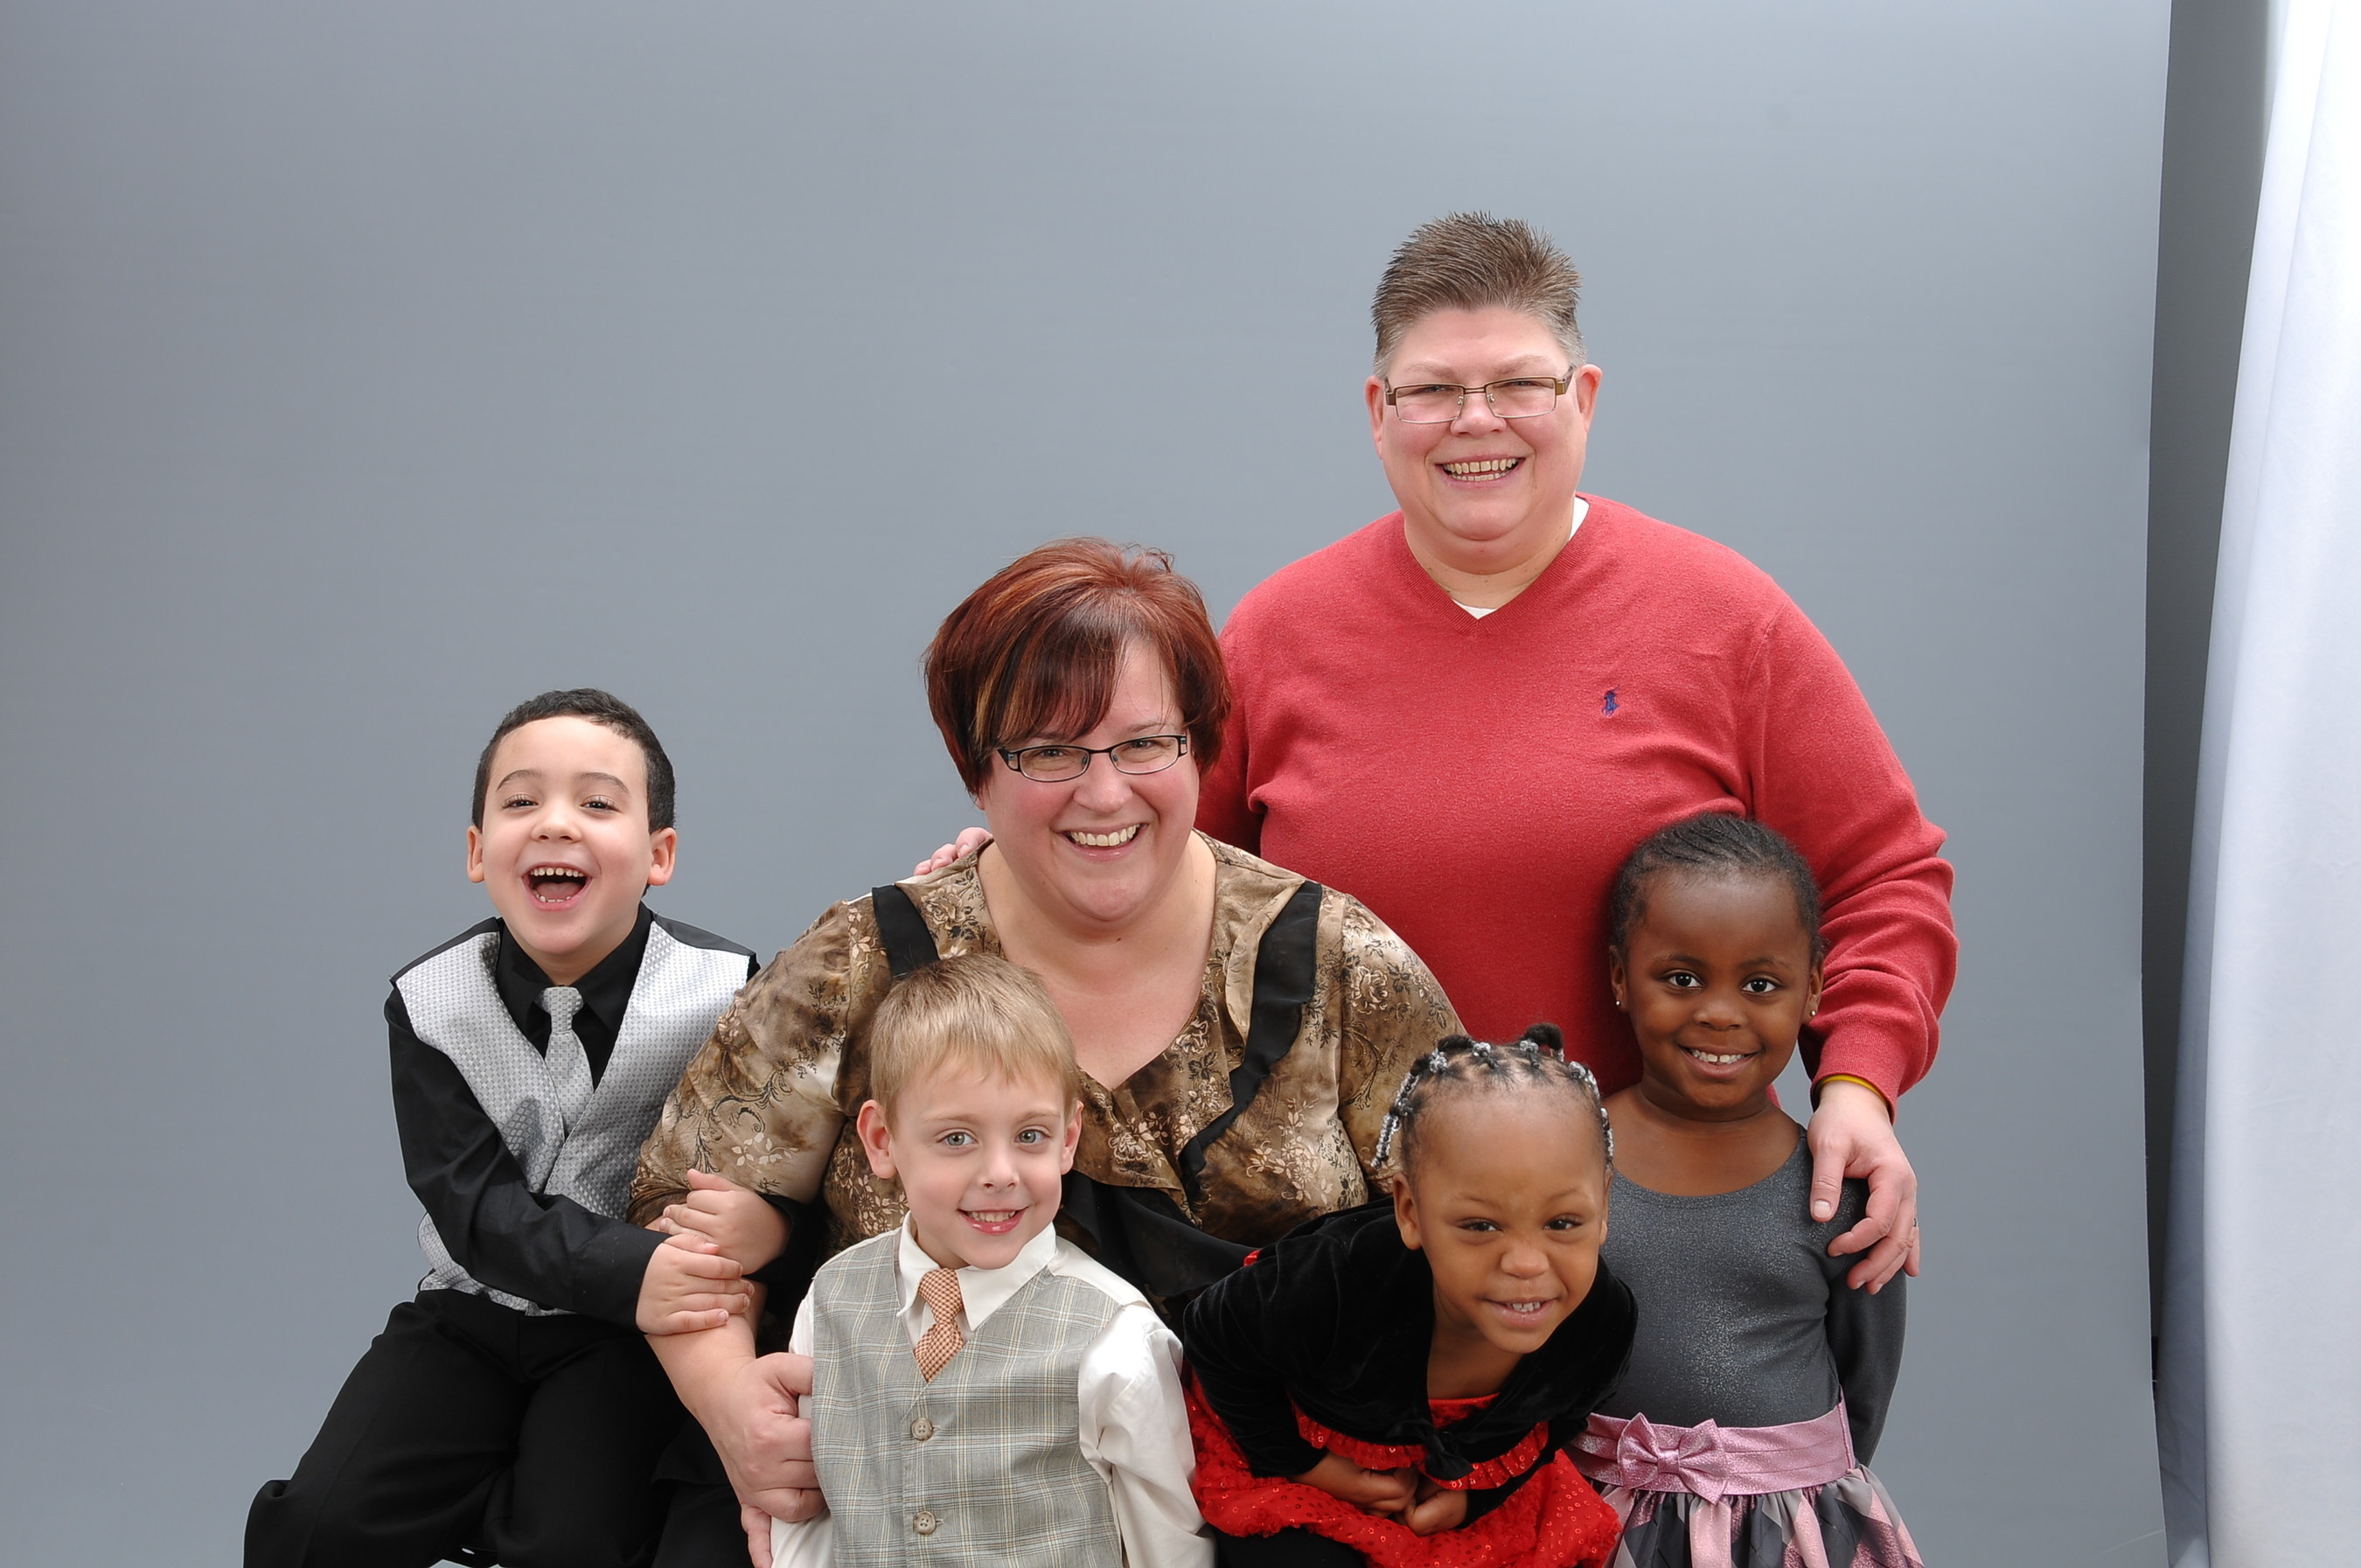 A recent family photo of April DeBoer and Jayne Rowse with their children (L-R) Nolan, Jacob, Rylee, and Ryanne.